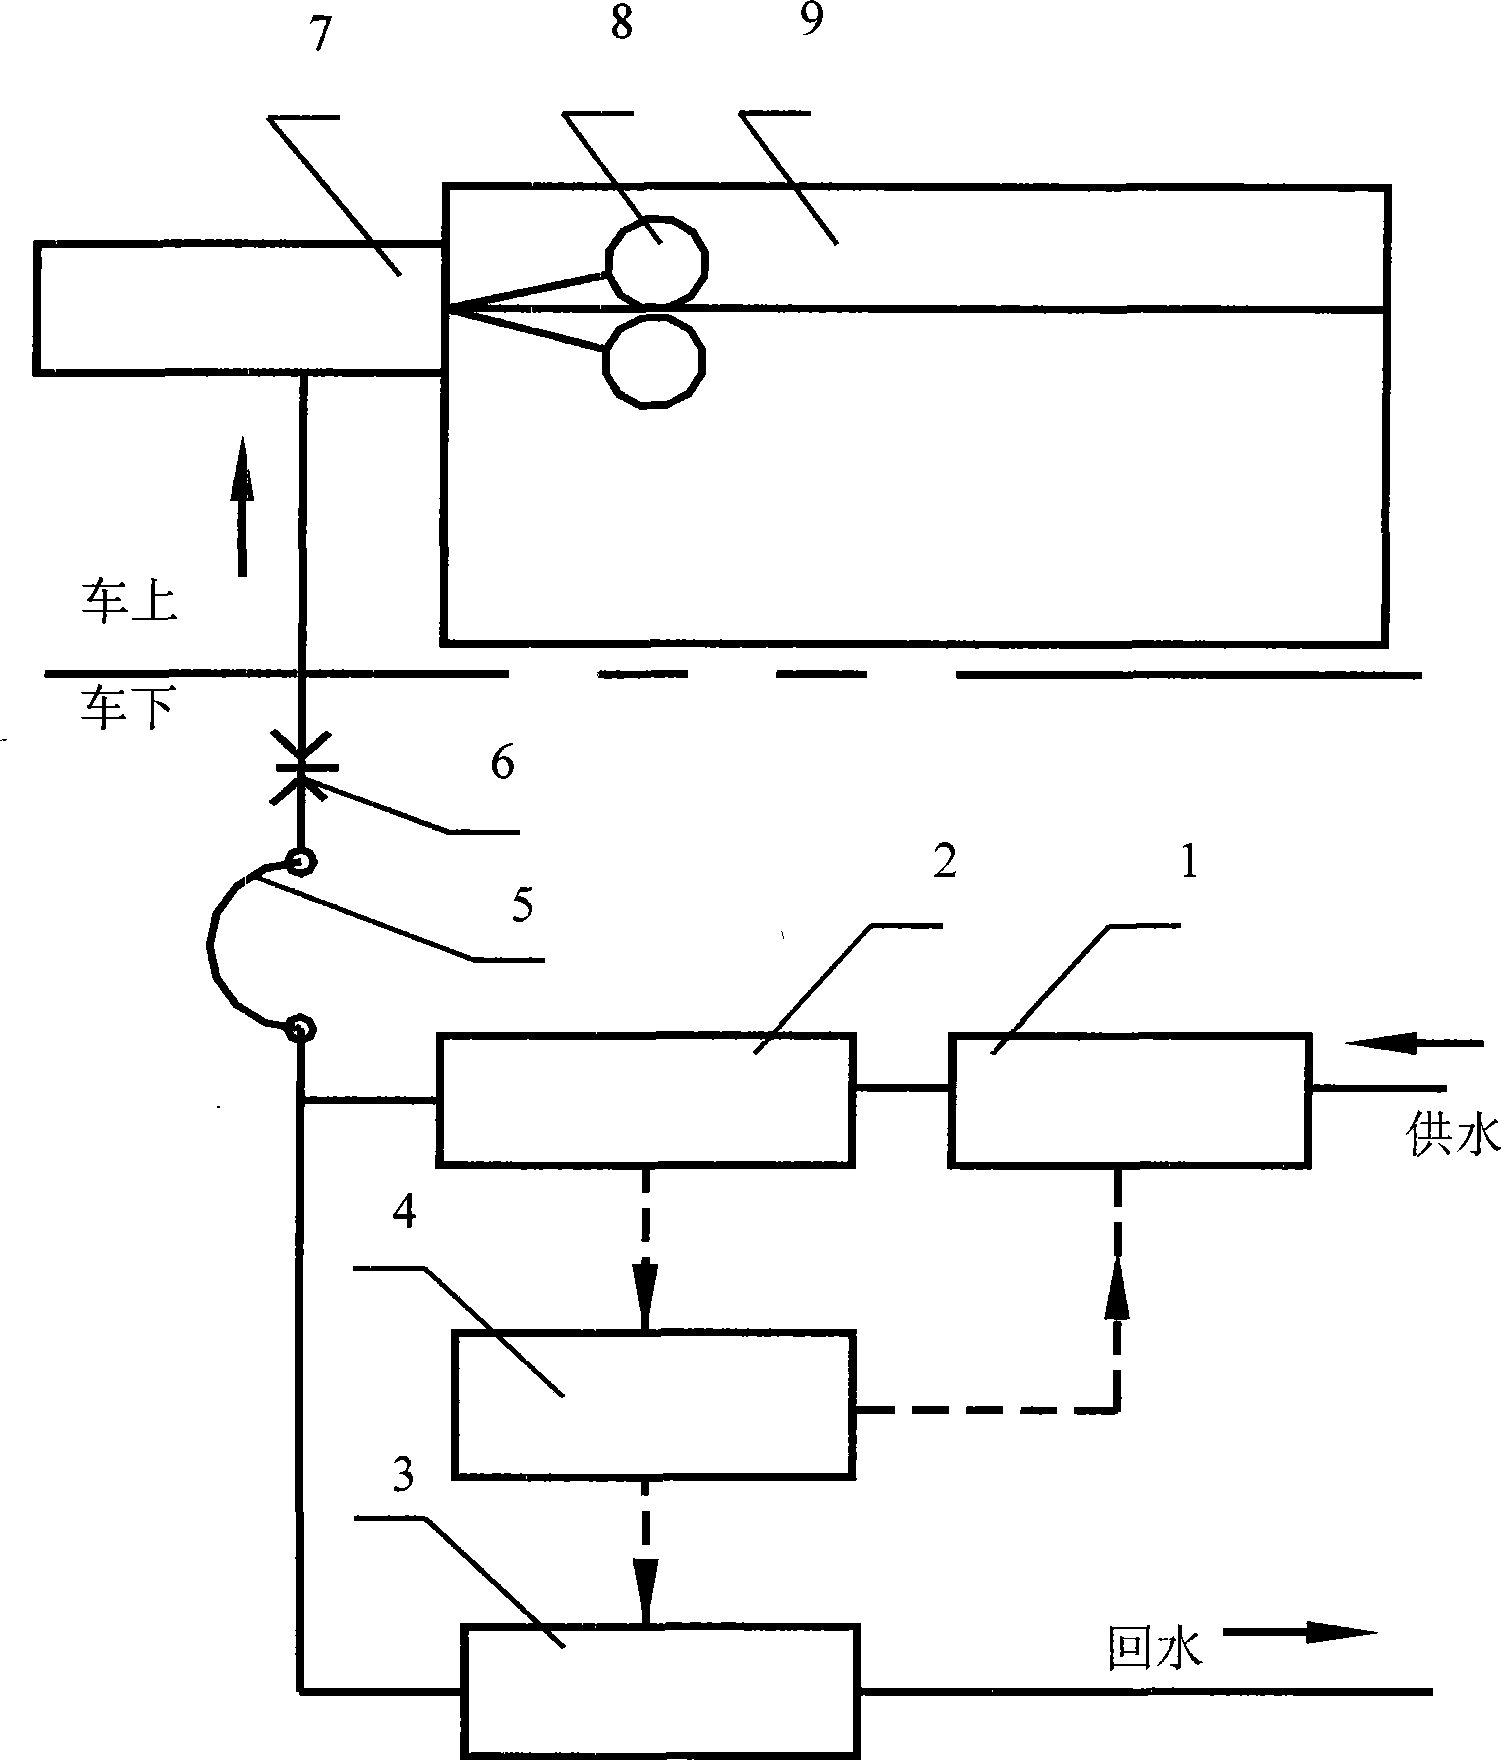 System control method for increasing the water supplying efficiency of railway carriage